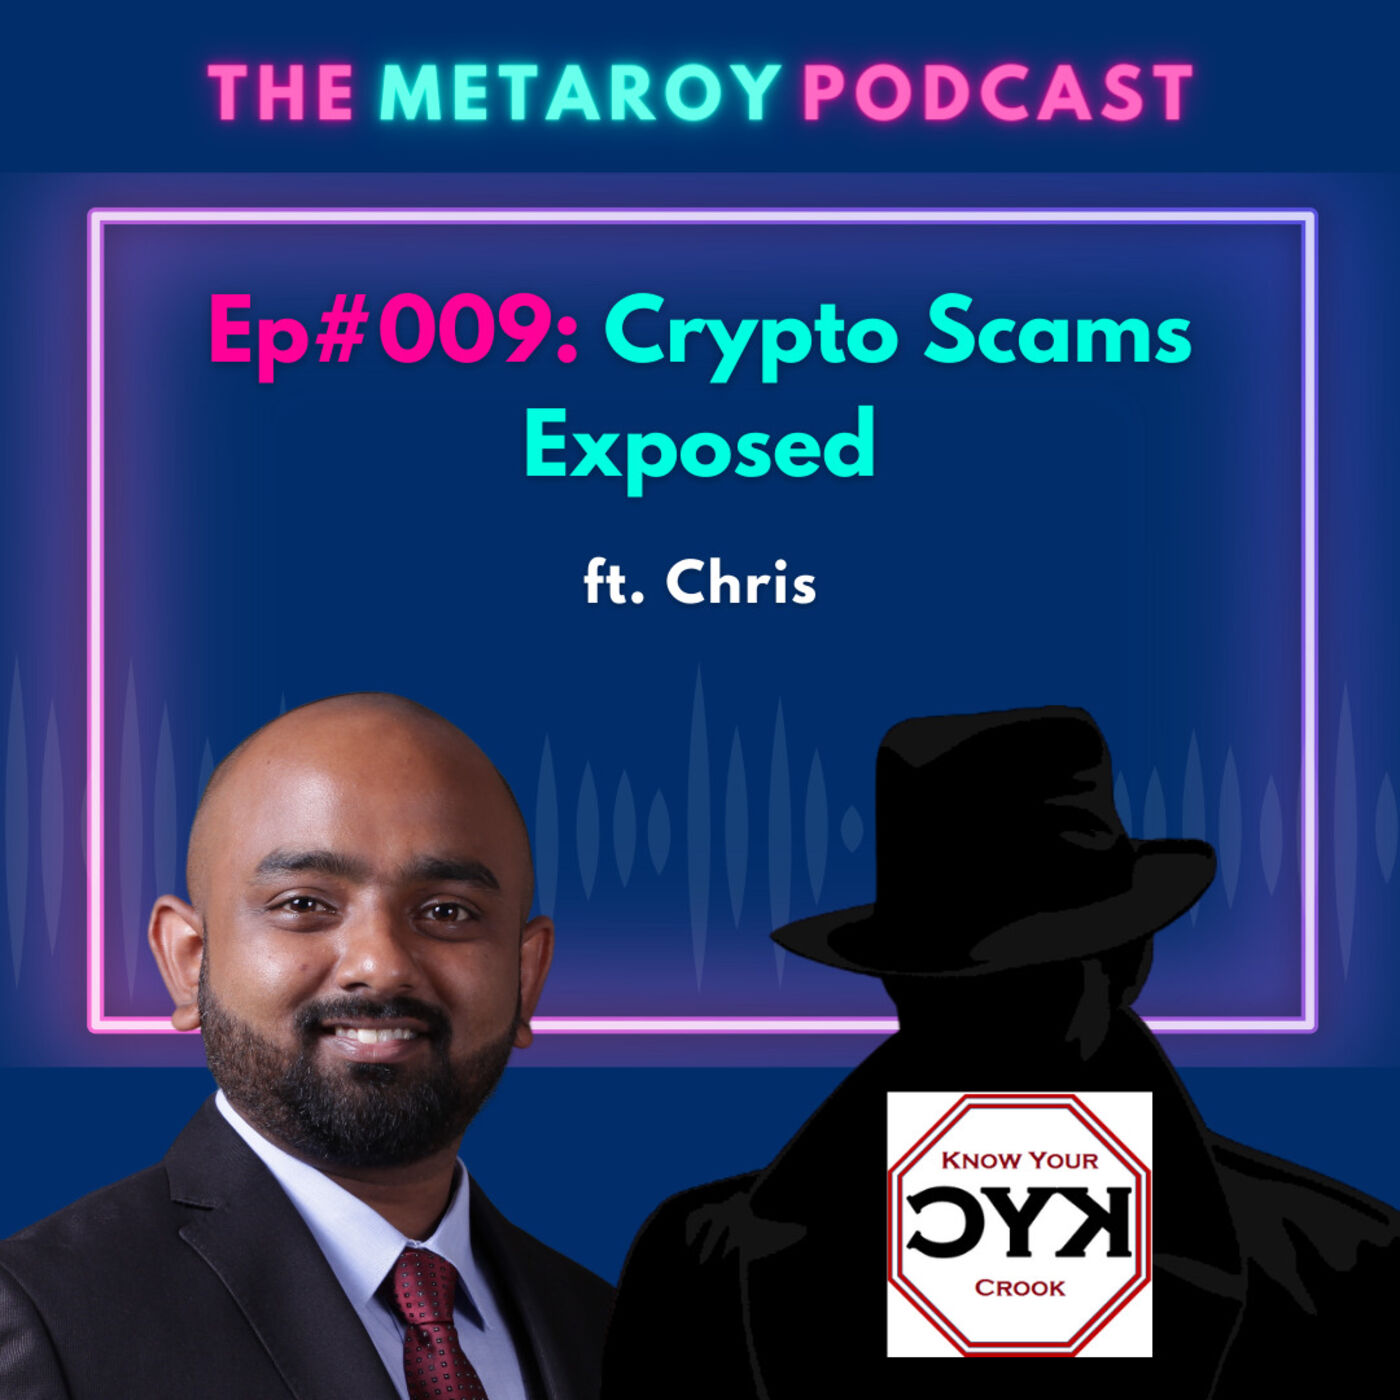 Chris: Crypto Scams Exposed | Ep #009